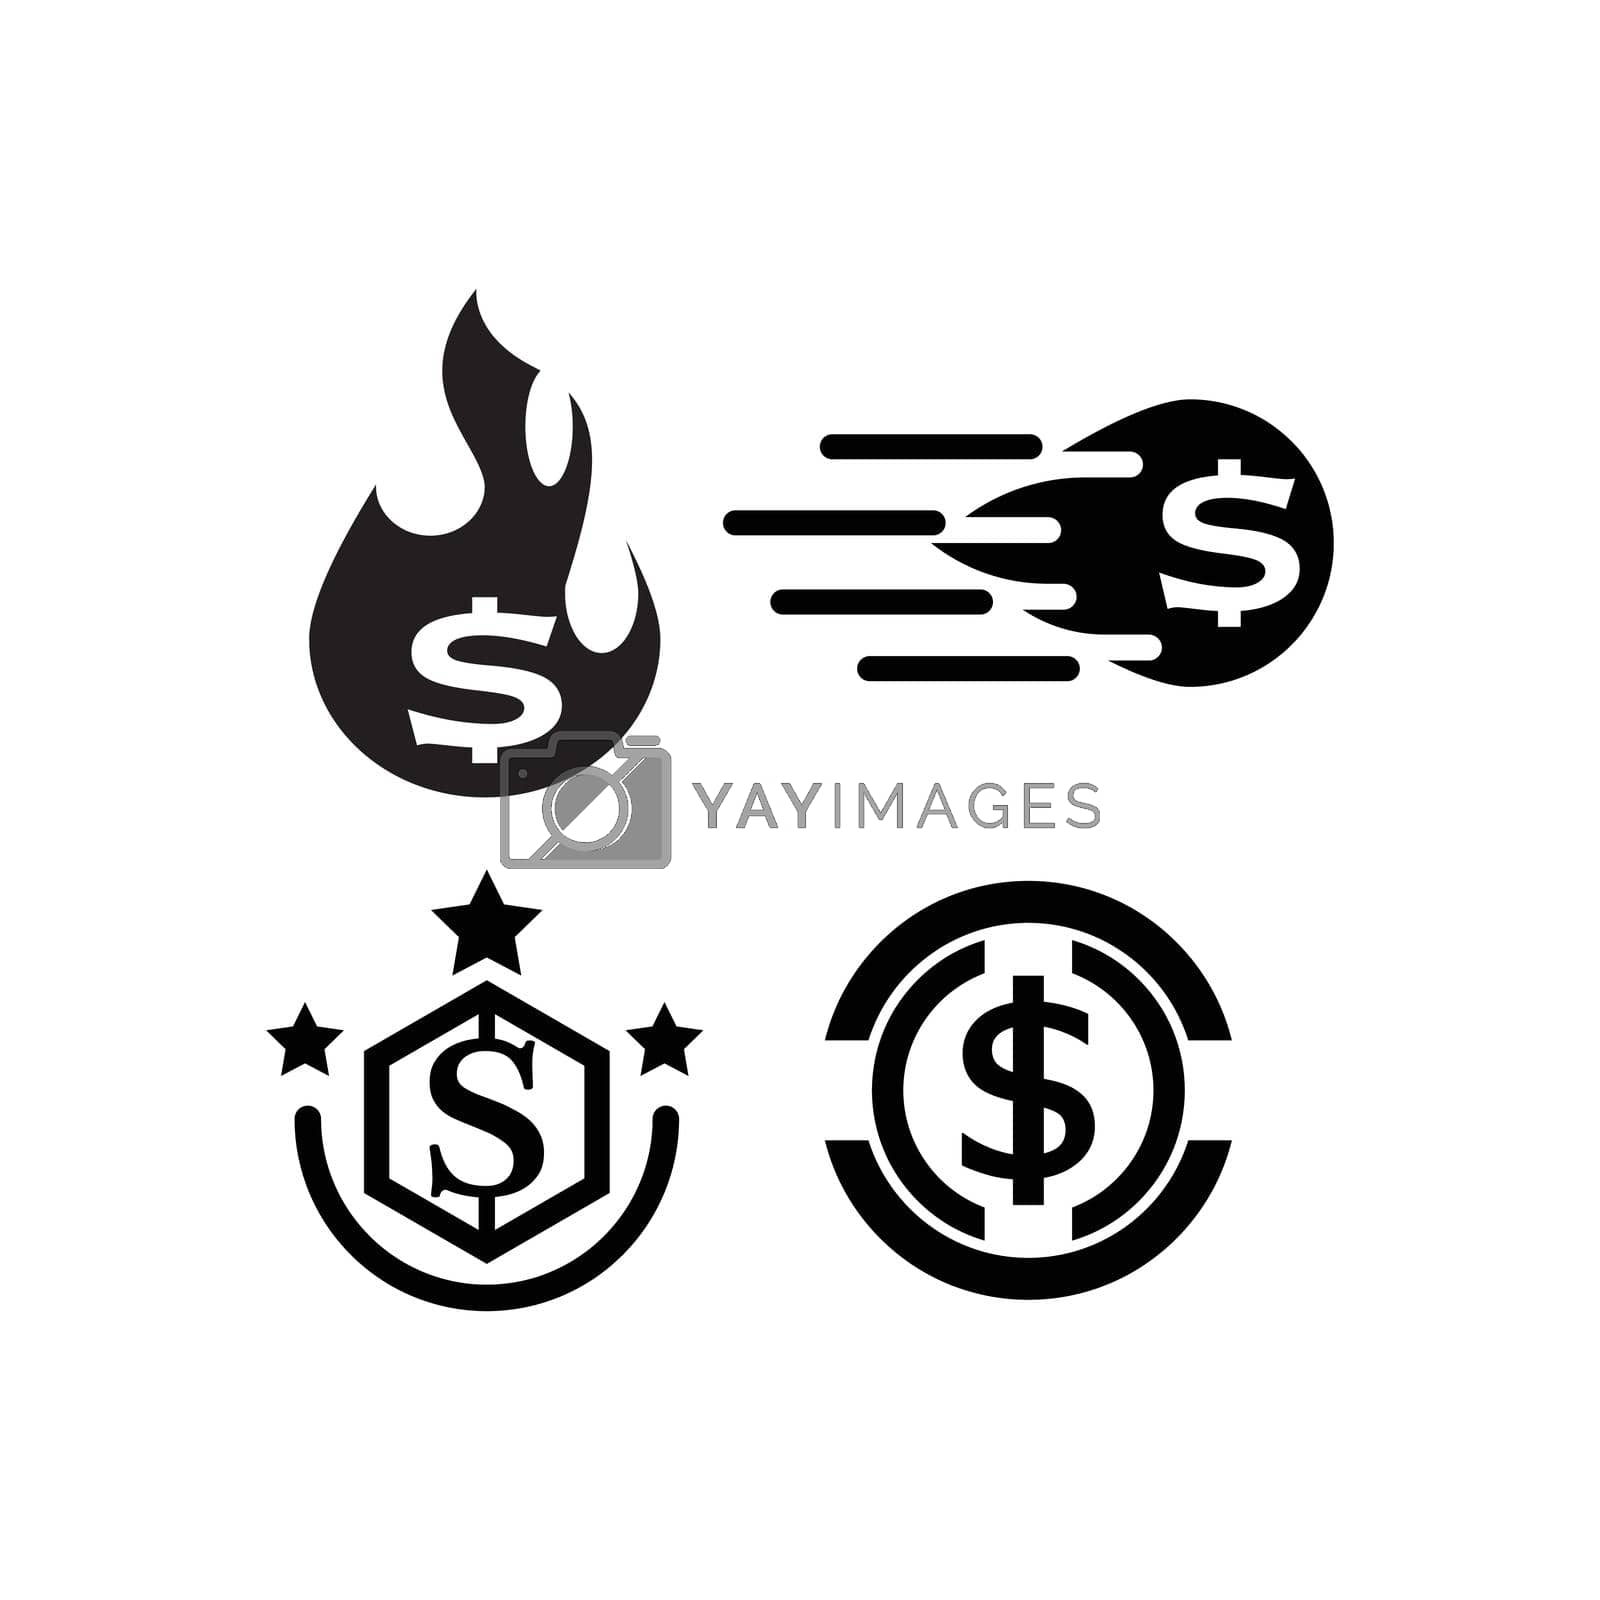 Royalty free image of Money vector icon by awk